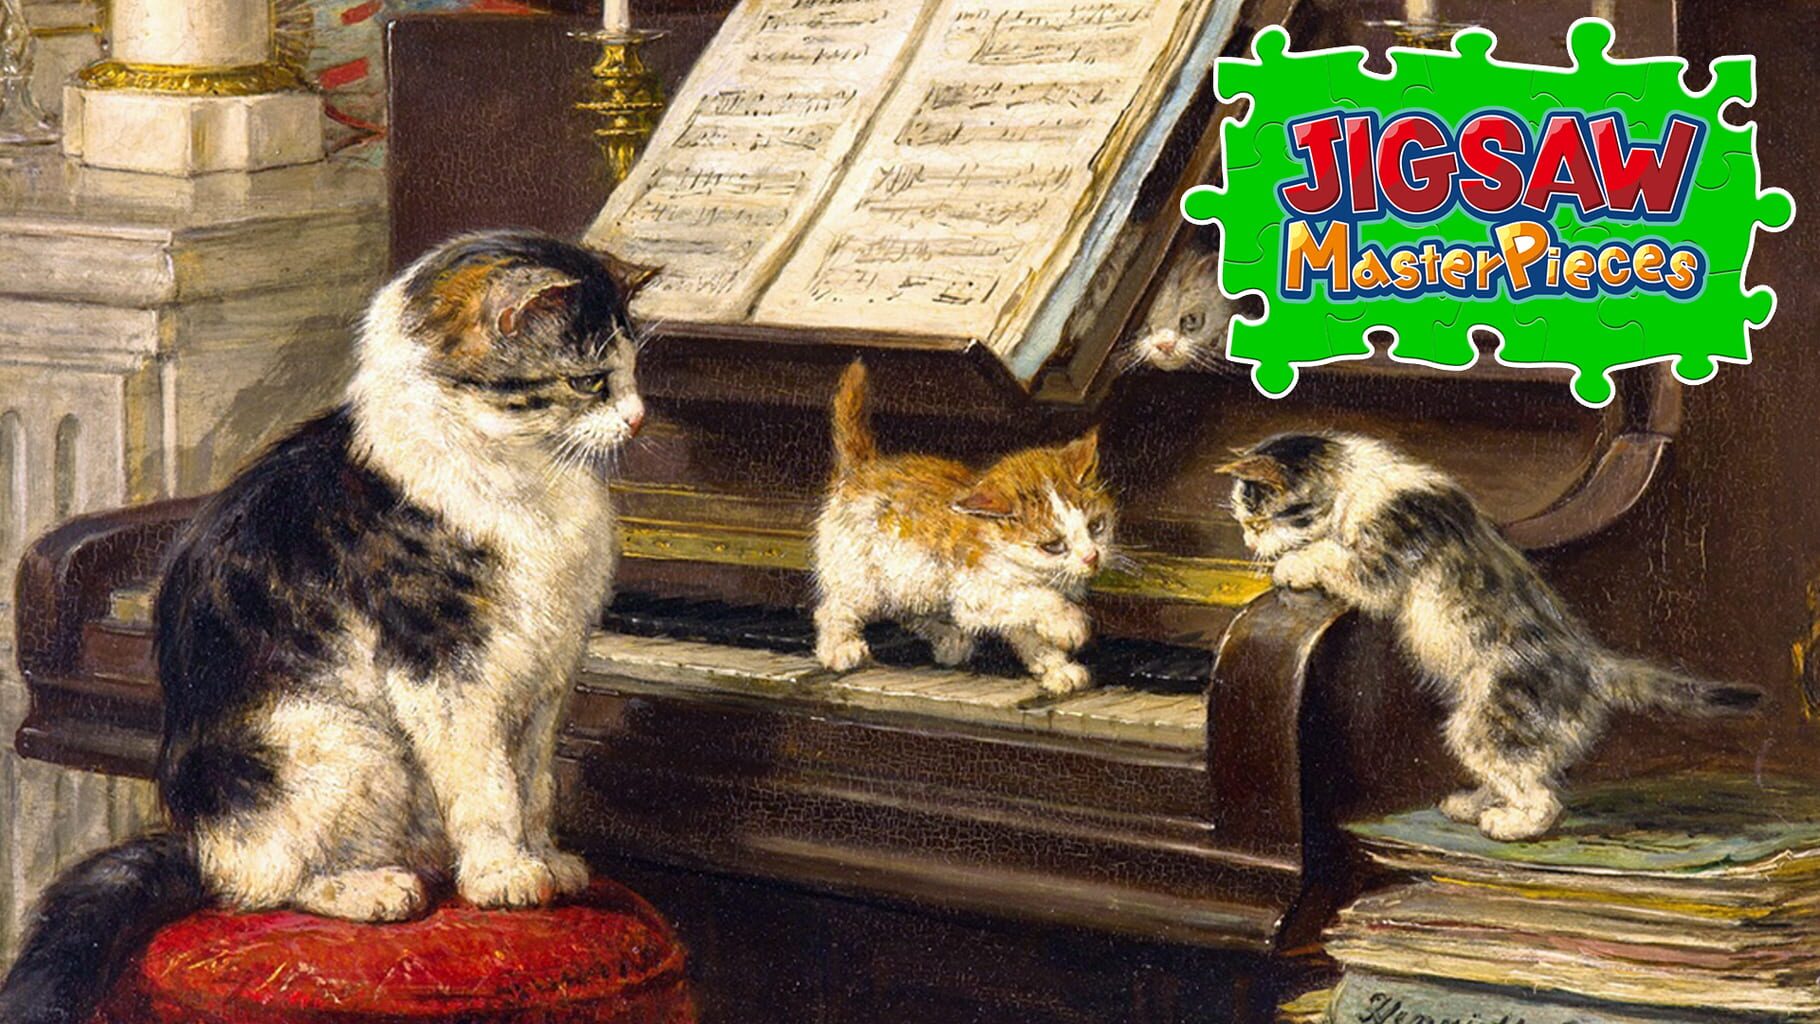 Jigsaw Masterpieces: Masterpieces of World - Dogs and Cats in the Painting artwork